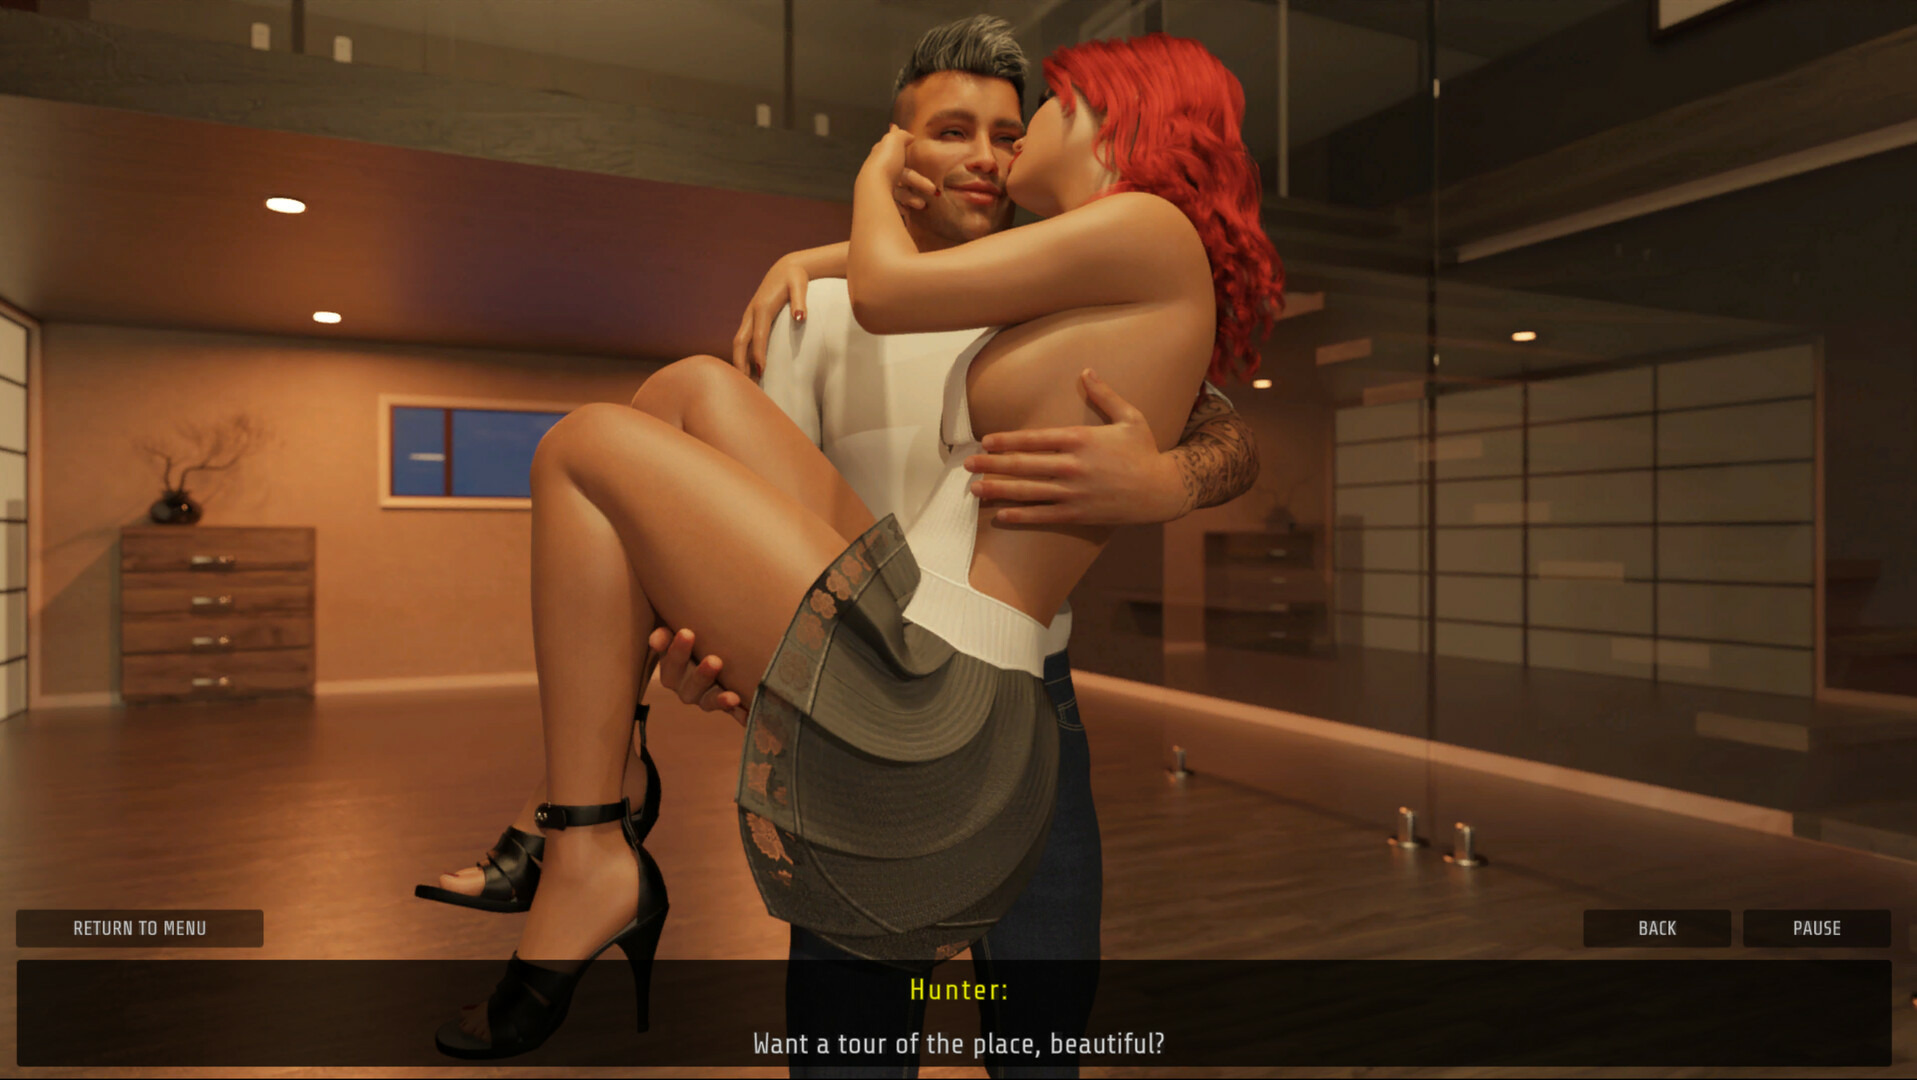 Sex Story - Ruby and Hunter - Episode 2 Steam CD Key [USD 1.92]